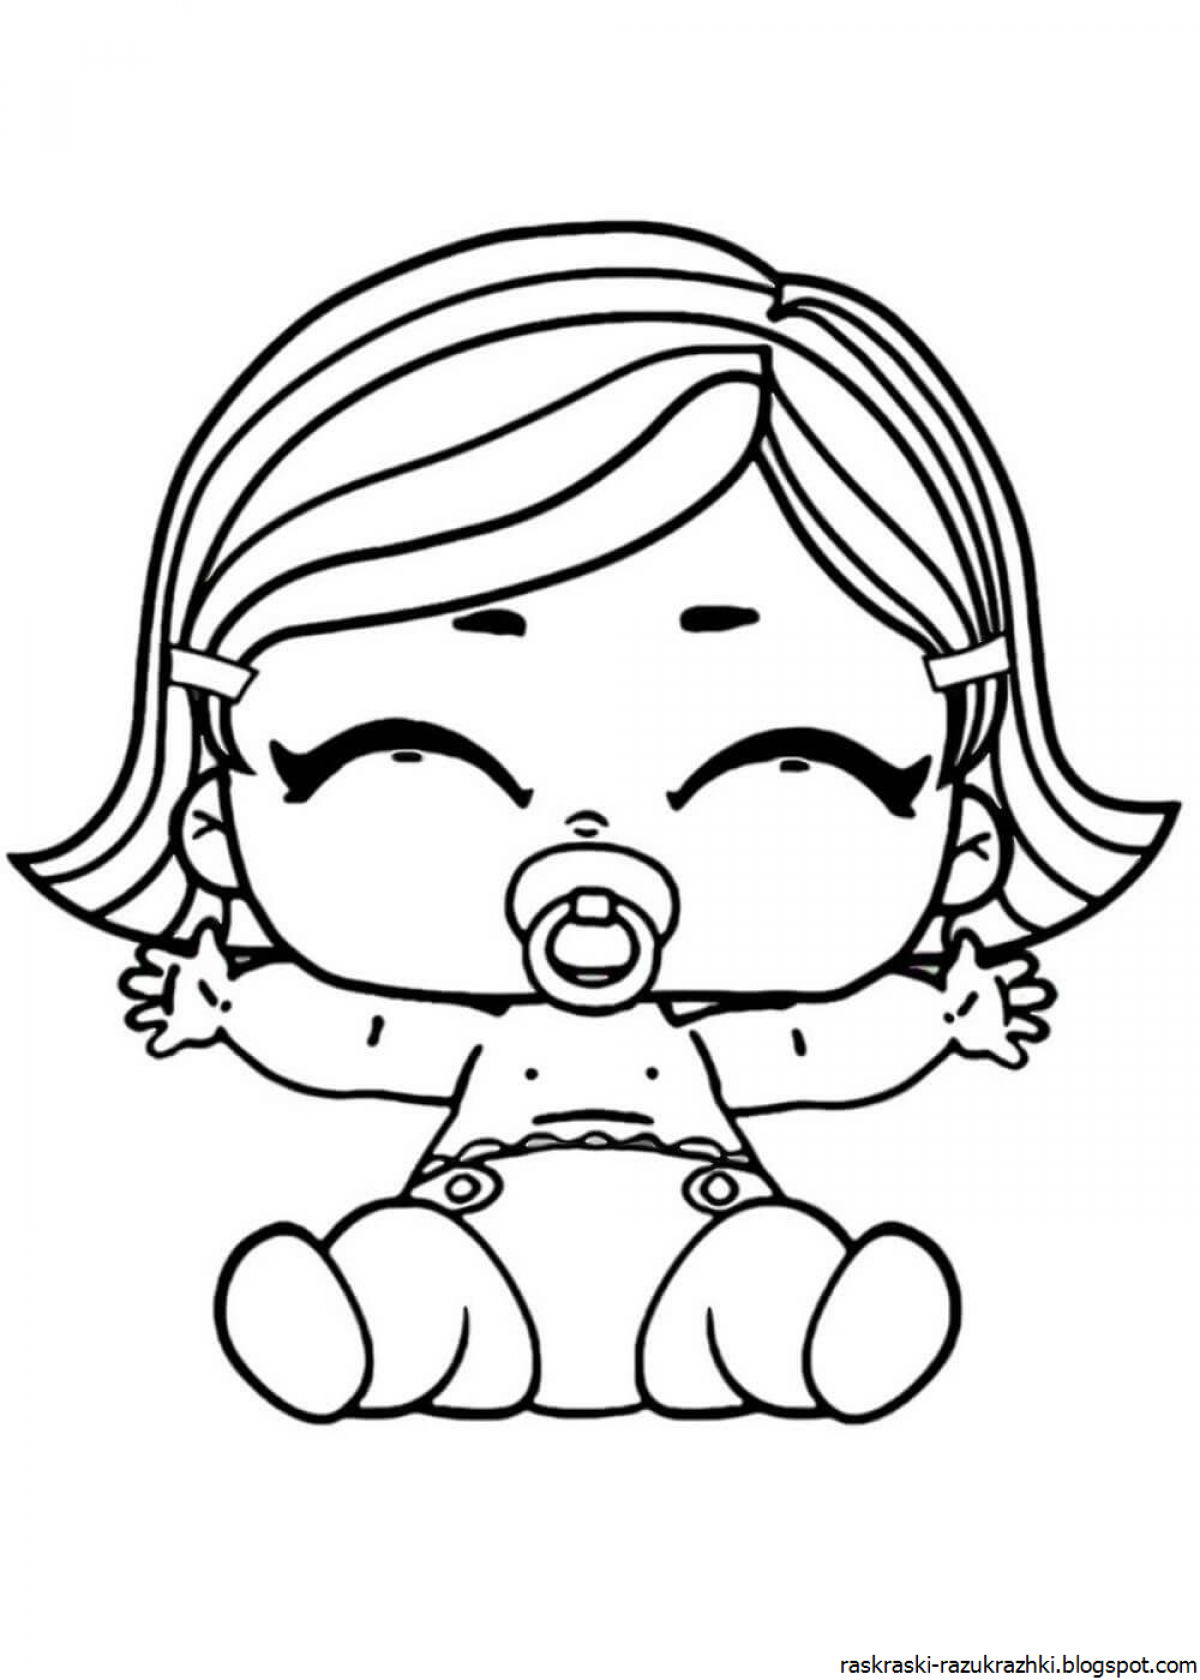 Cozy coloring pages for dolls